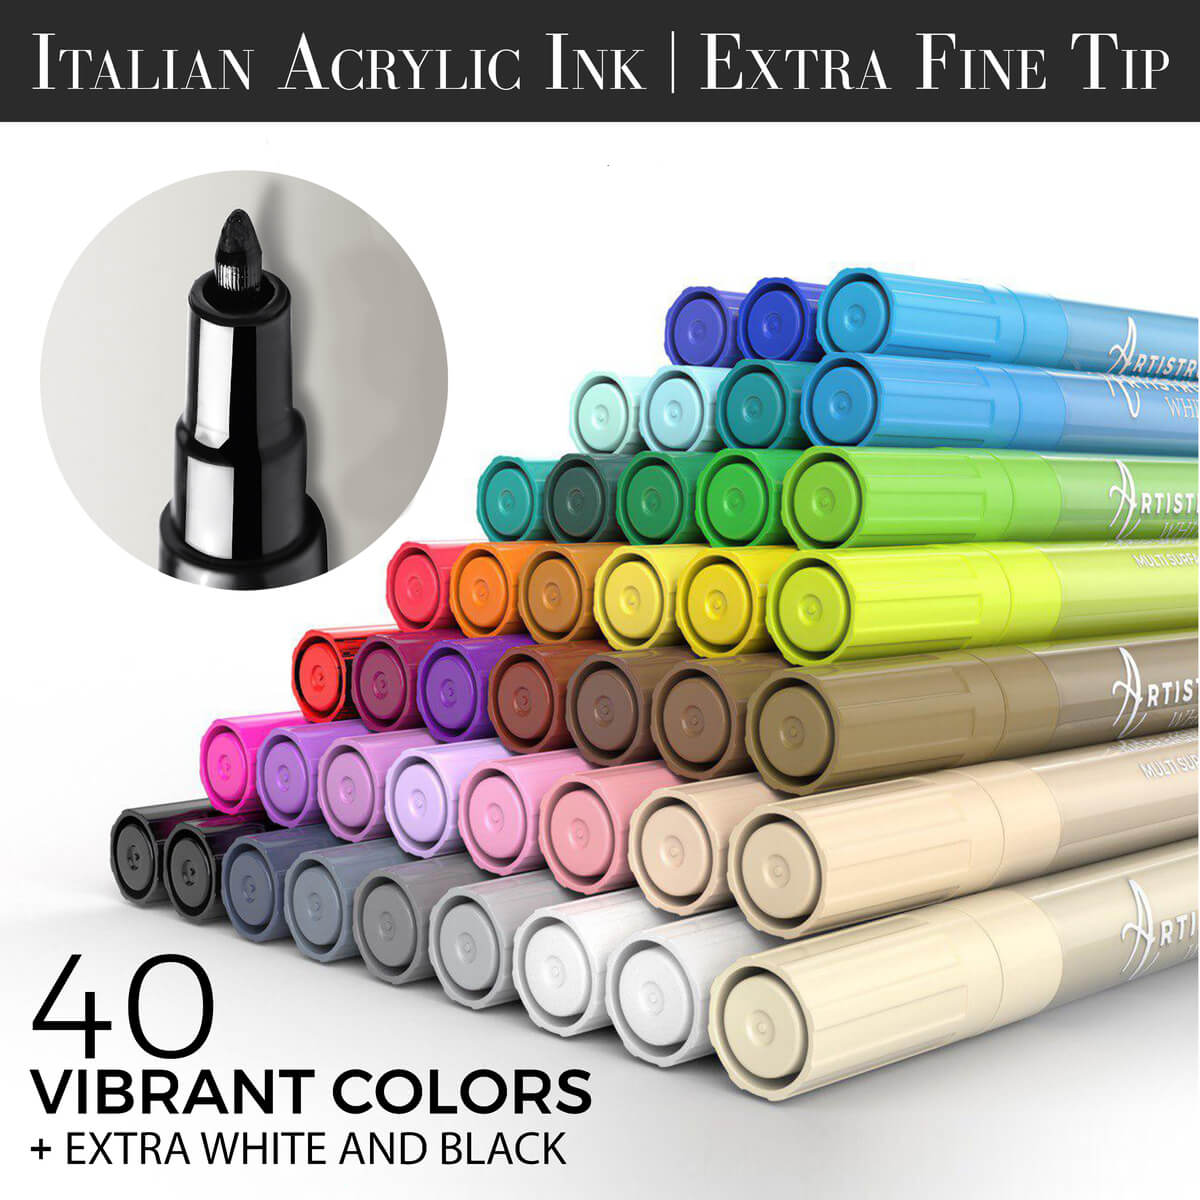 40 vibrant colors + extra white and black